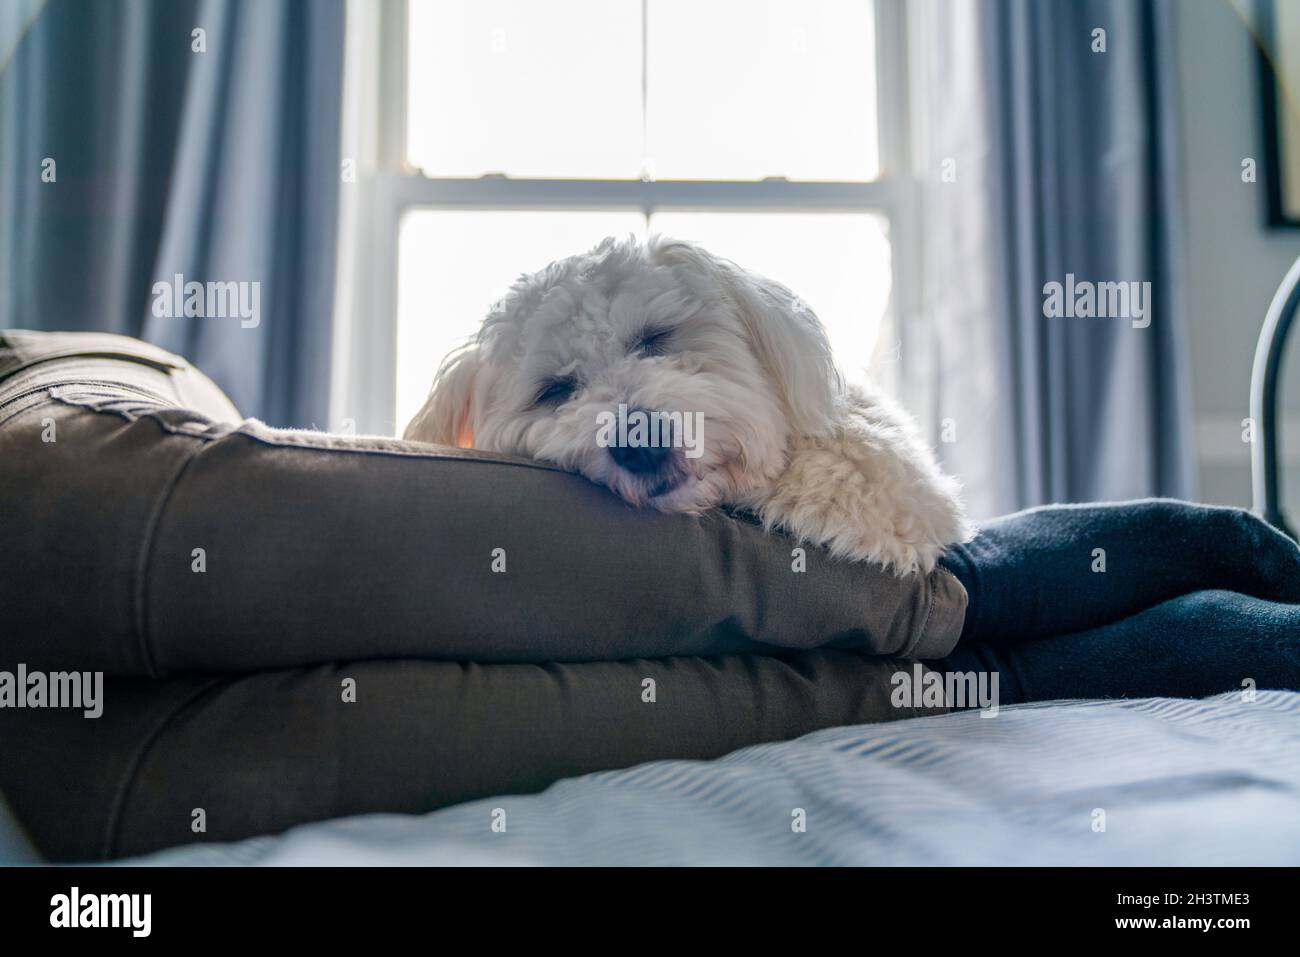 Young puppy dog snoozing / relaxing with owner on her bed Stock Photo